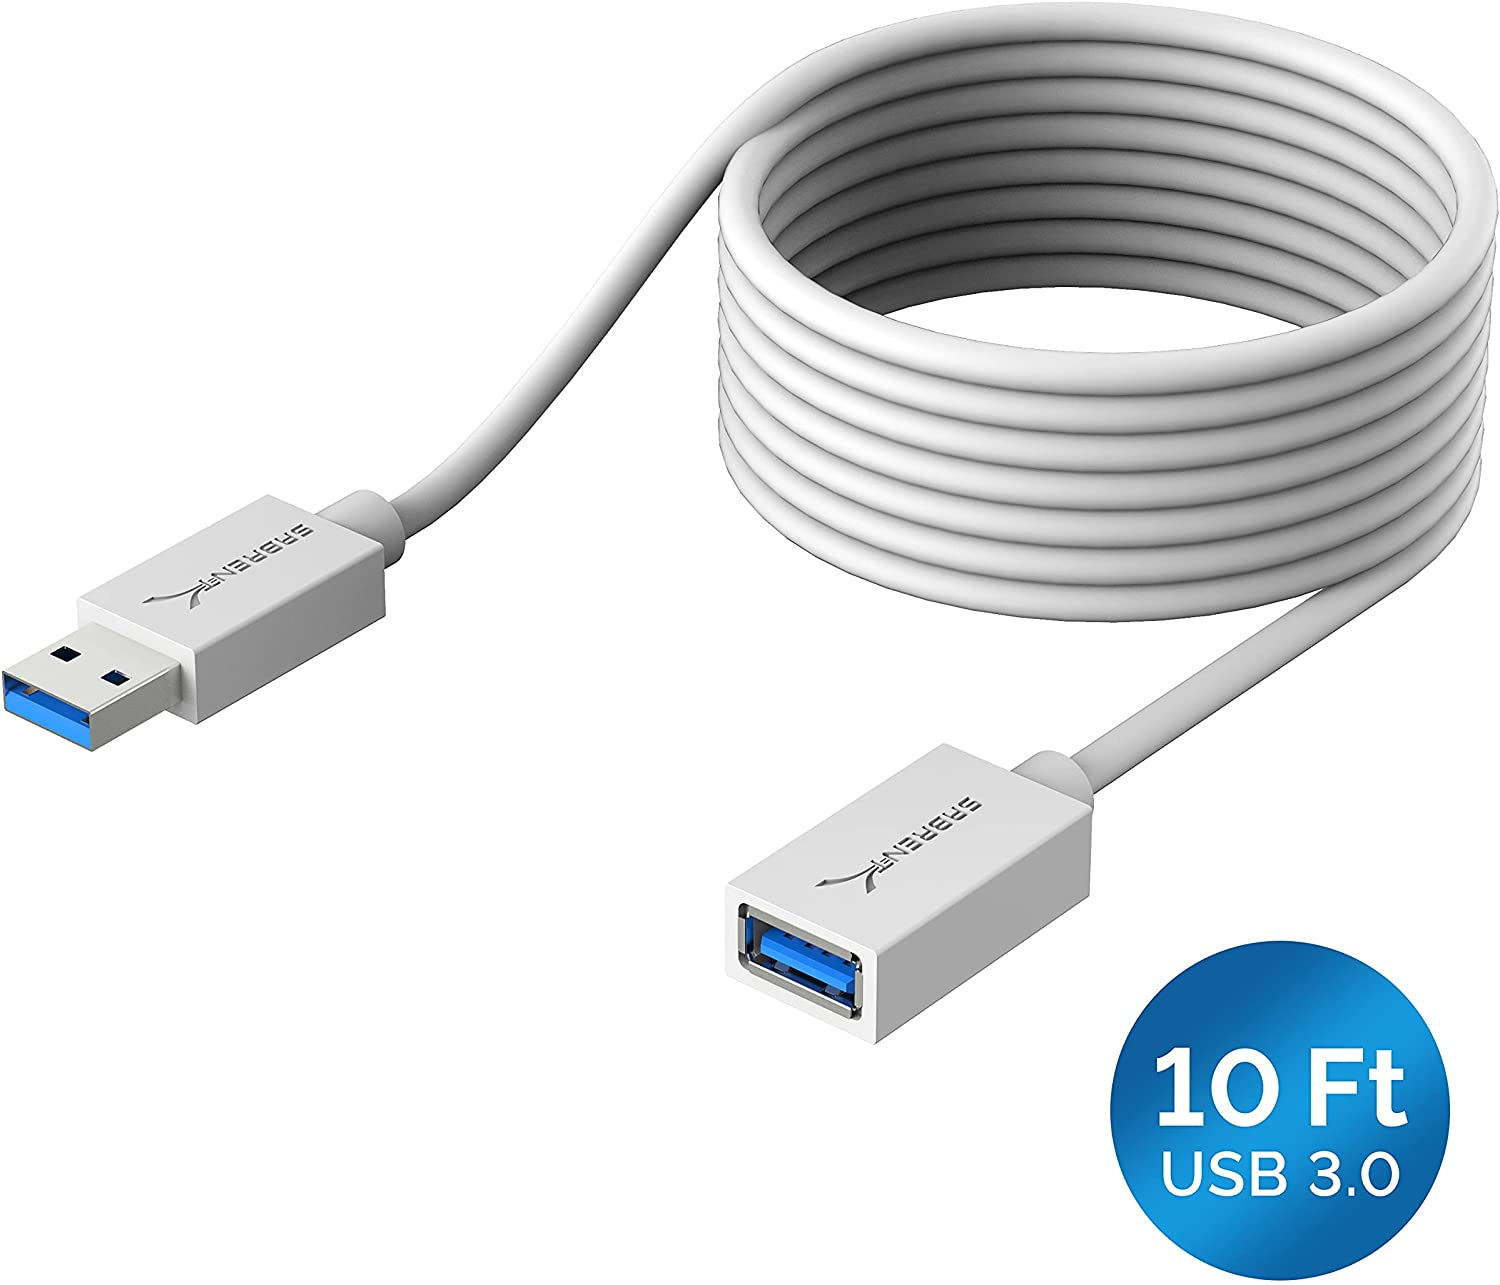 SABRENT USB 3.0 Extension Cable 22AWG A Male to A Female, 10 Feet [White] for Data Transfer/Charging, Compatible with PCs, Laptops, Printers (CB-3010)